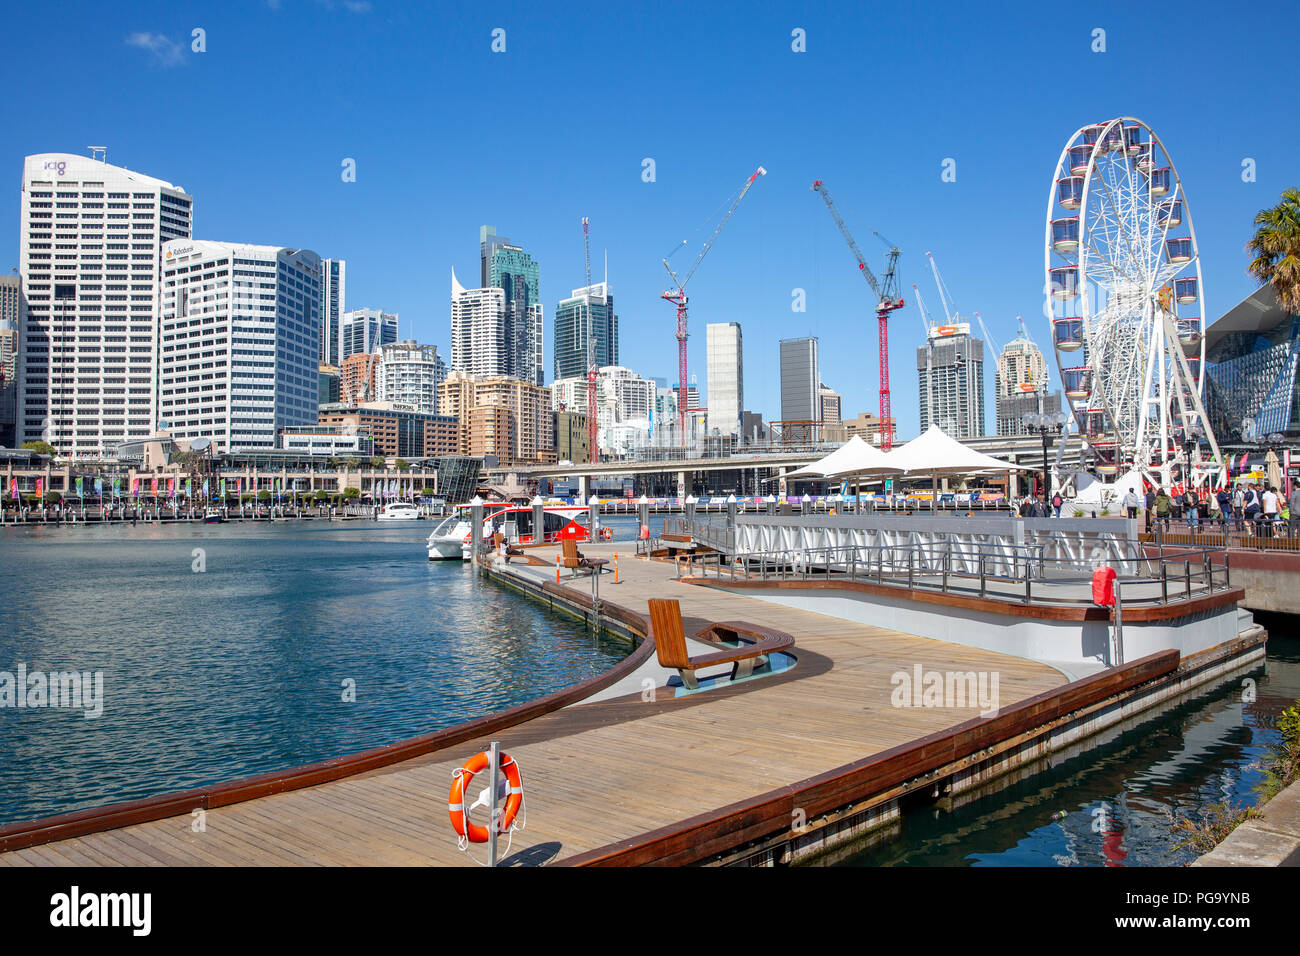 Darling Harbour and Giant ferris wheel in Sydney city centre,New South Wales,Australia Stock Photo